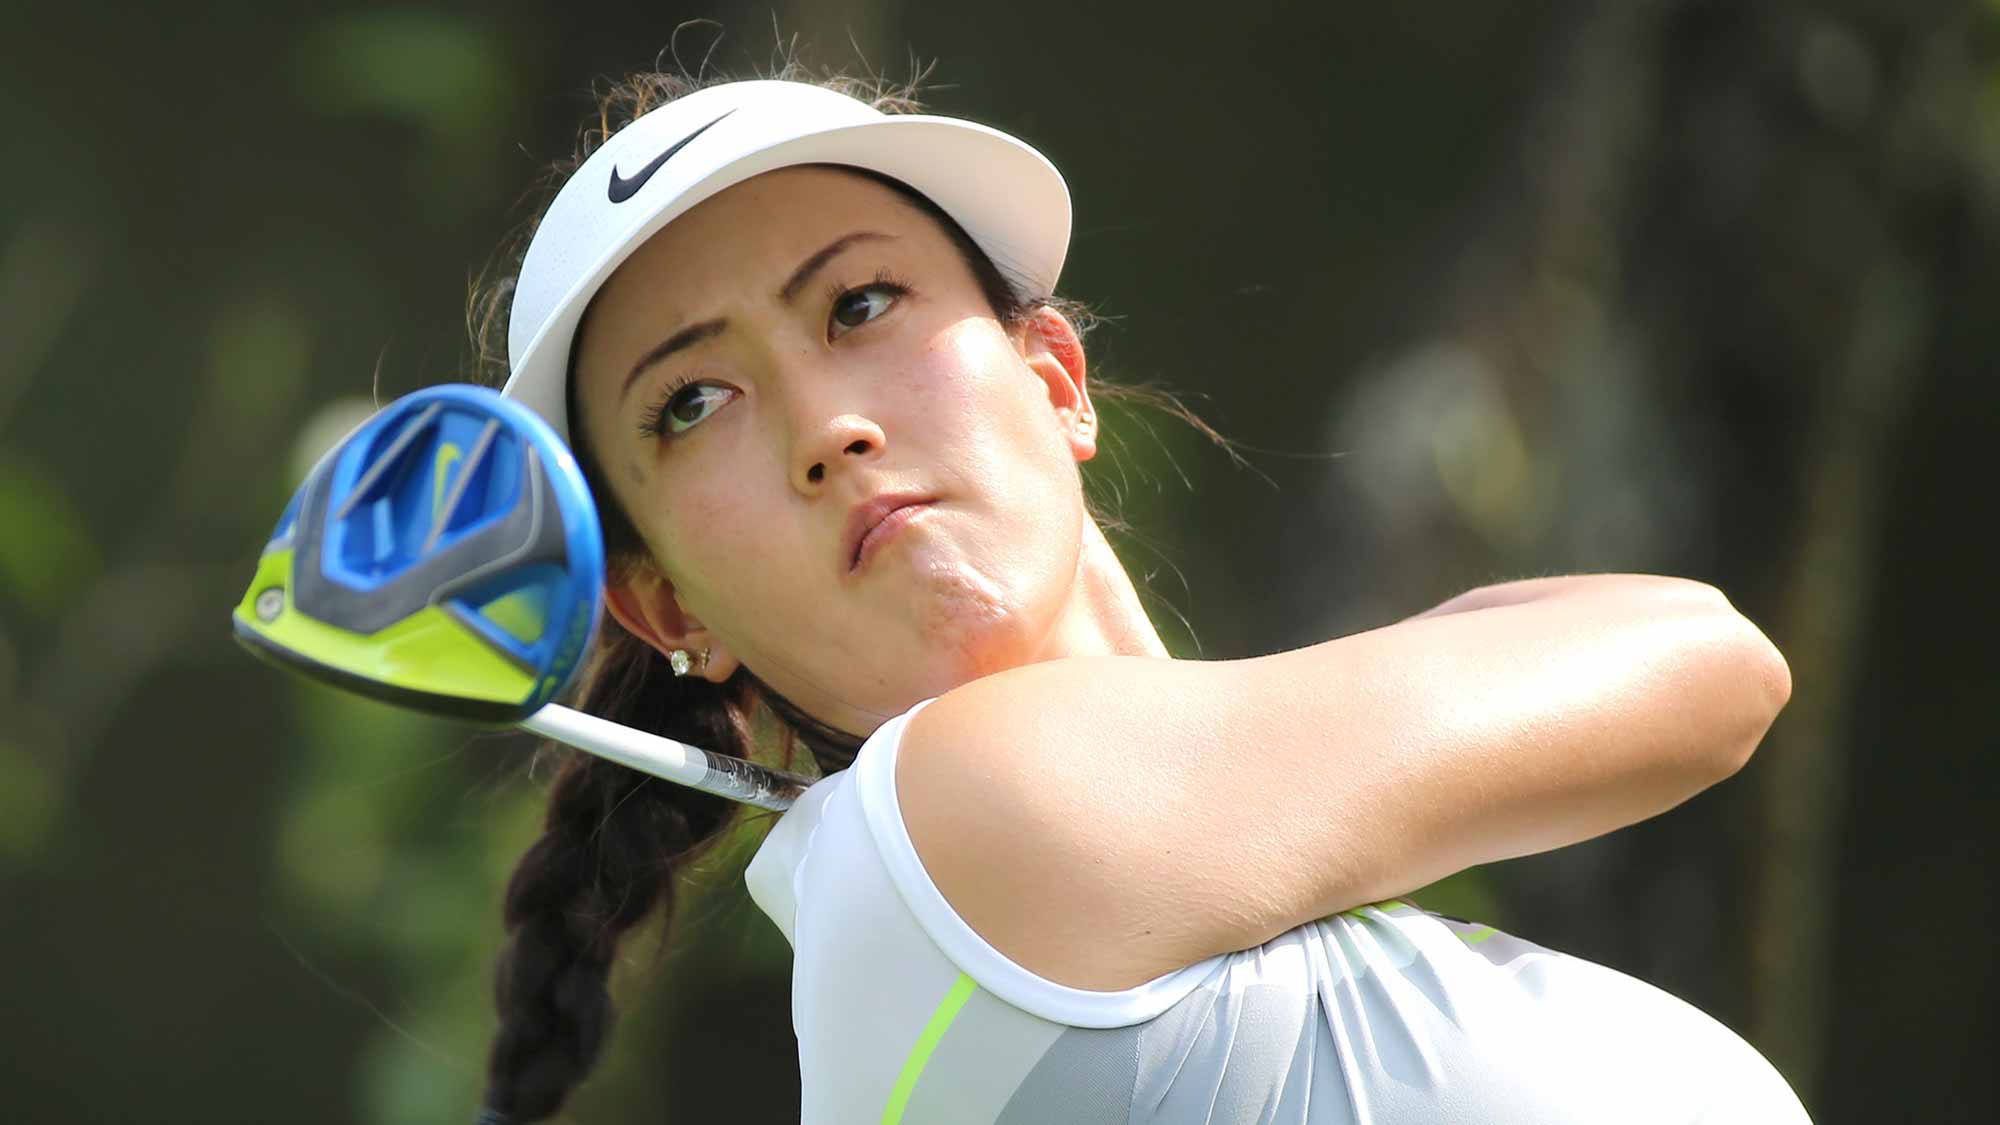 Michelle Wie Hits A Tee Shot During A Practice Round at Honda LPGA Thailand